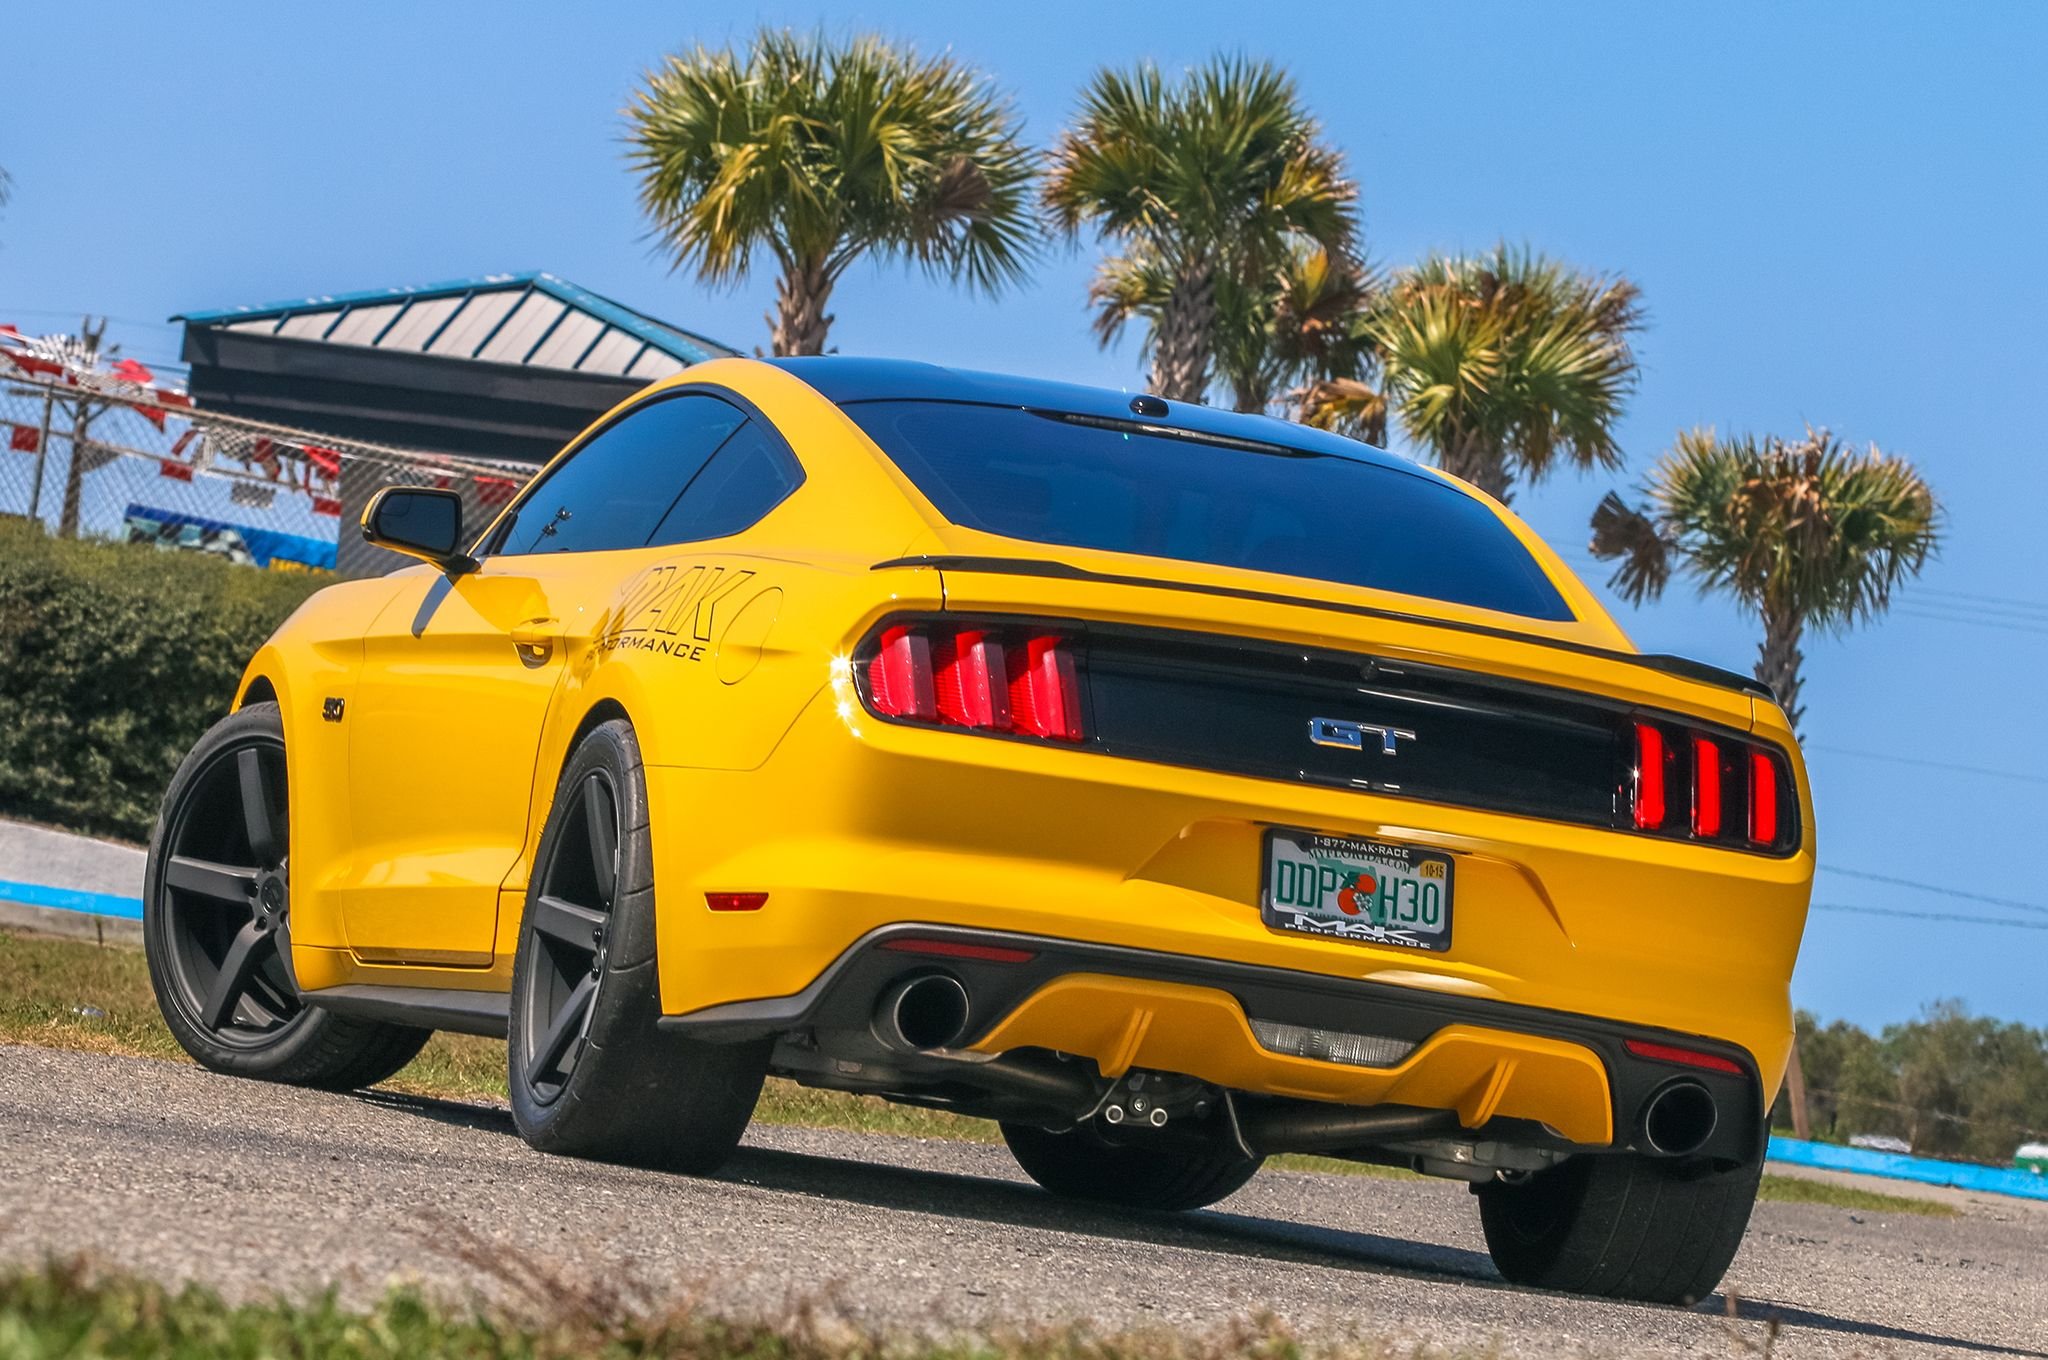 2015, Ford, Mustang, S550, Mak, Pro, Touring, Charger, Super, Car, Usa,  11 Wallpaper